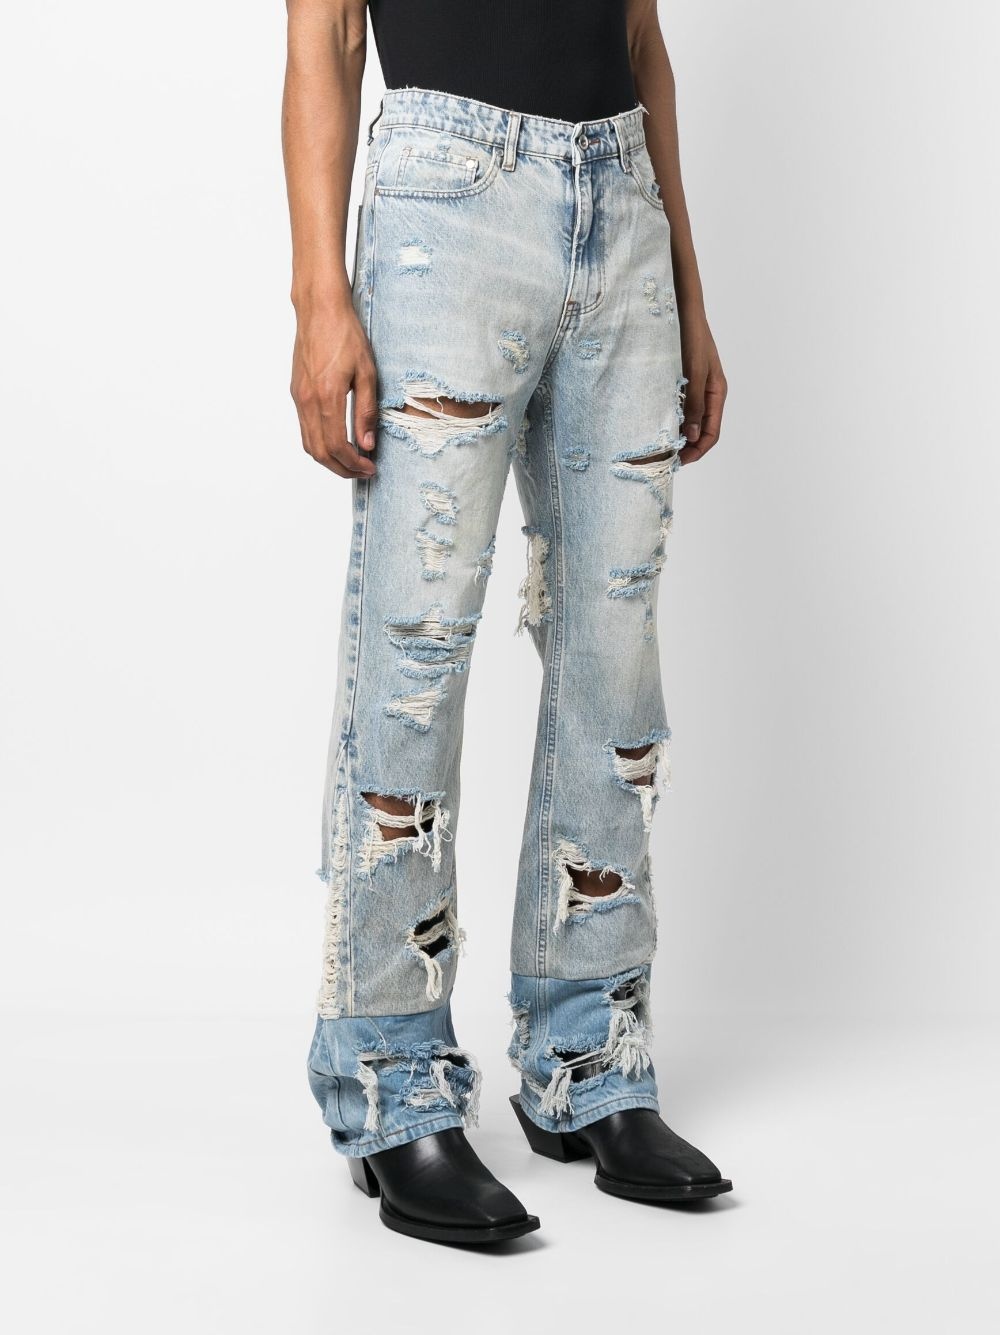 Gnarly distressed jeans - 3